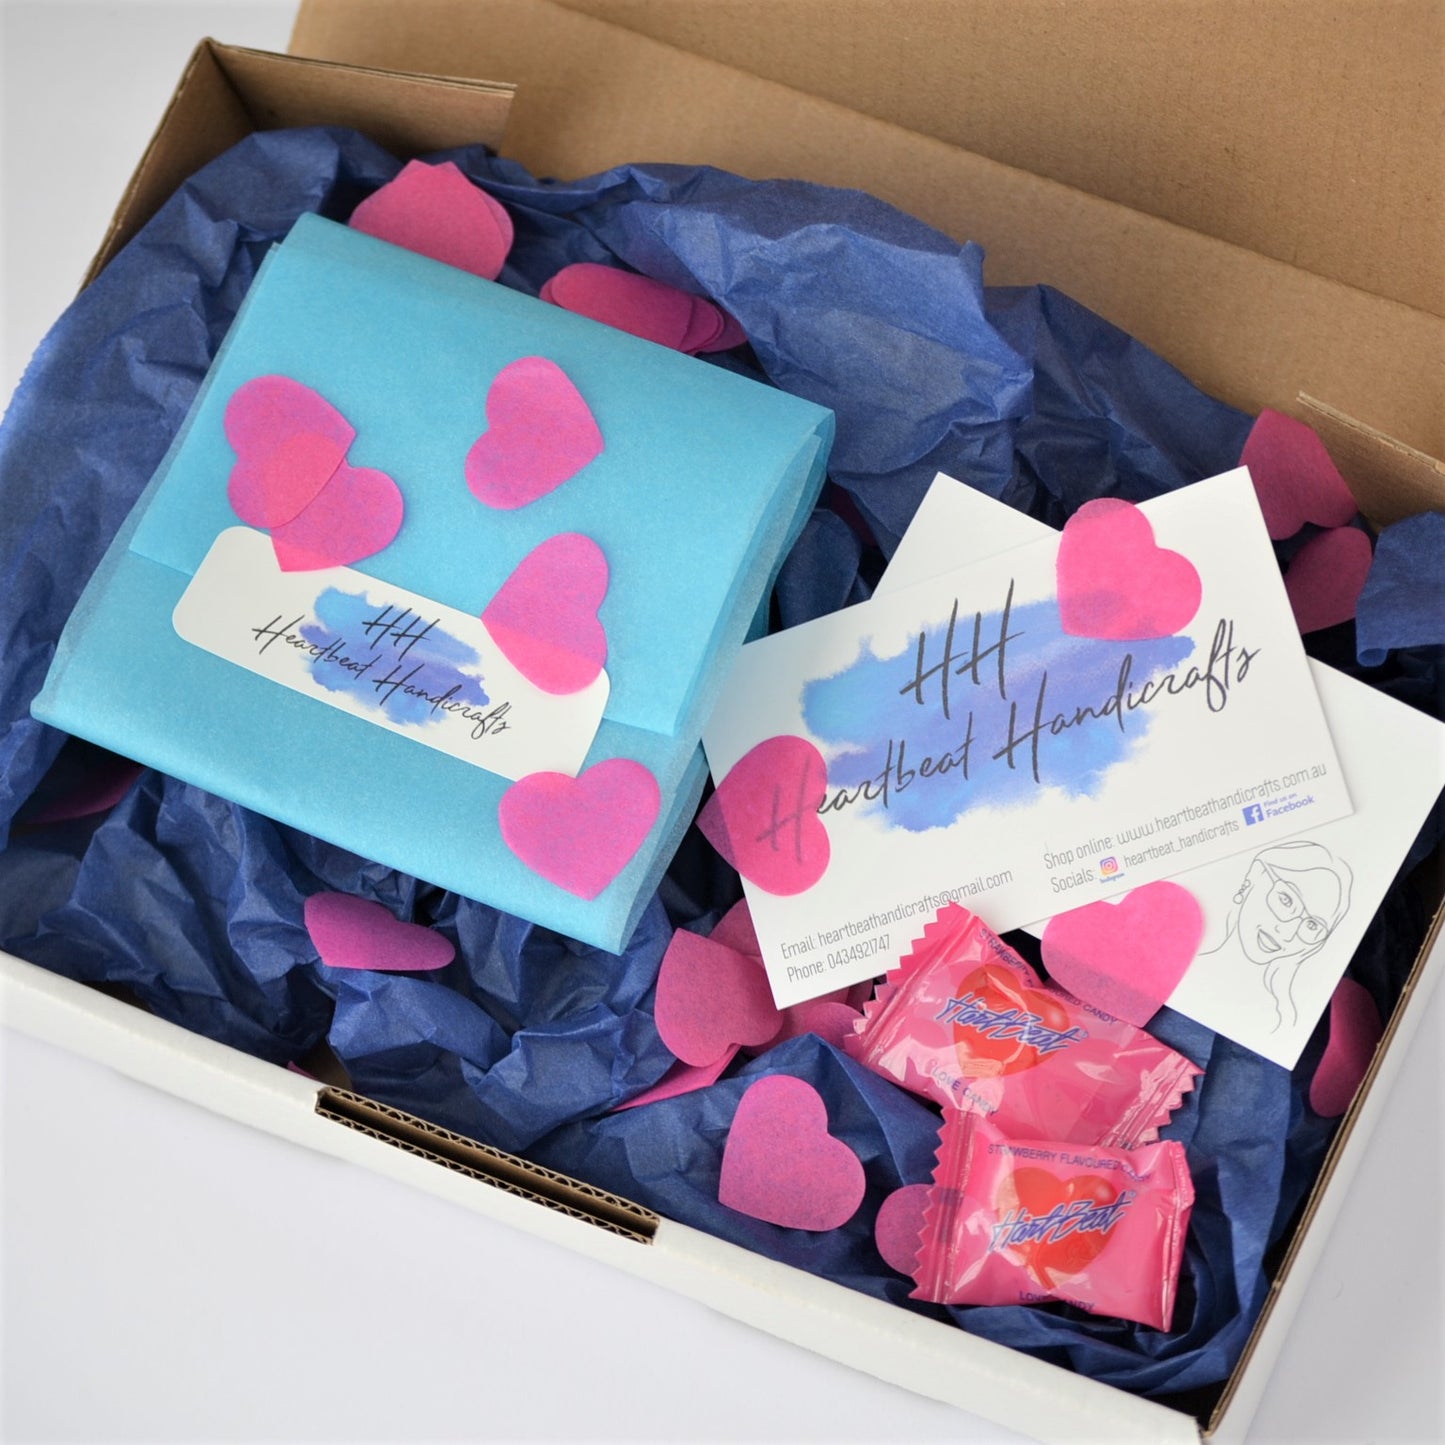 Example of packaging of order, showing blue tissue paper wrapping, pink heart-shaped confetti and a Heartbeat Handicrafts business card